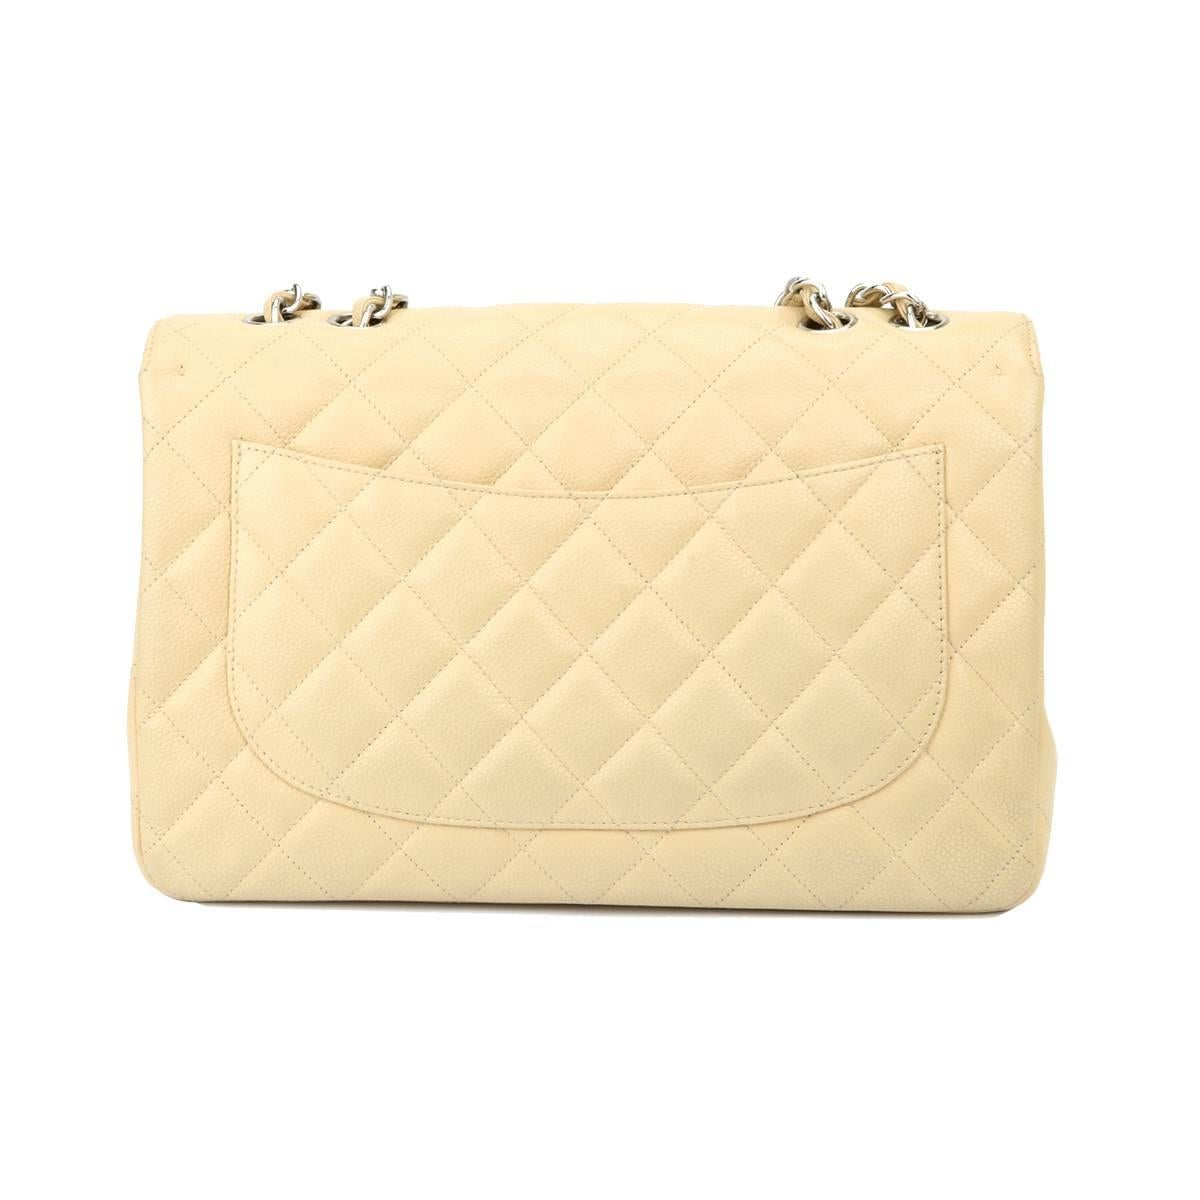 Authentic CHANEL Classic Single Flap Jumbo Beige Clair Caviar with Silver Hardware 2009.

This stunning bag is in an excellent condition. The bag still holds the original shape and the hardware is still very shiny.

Exterior Condition: excellent